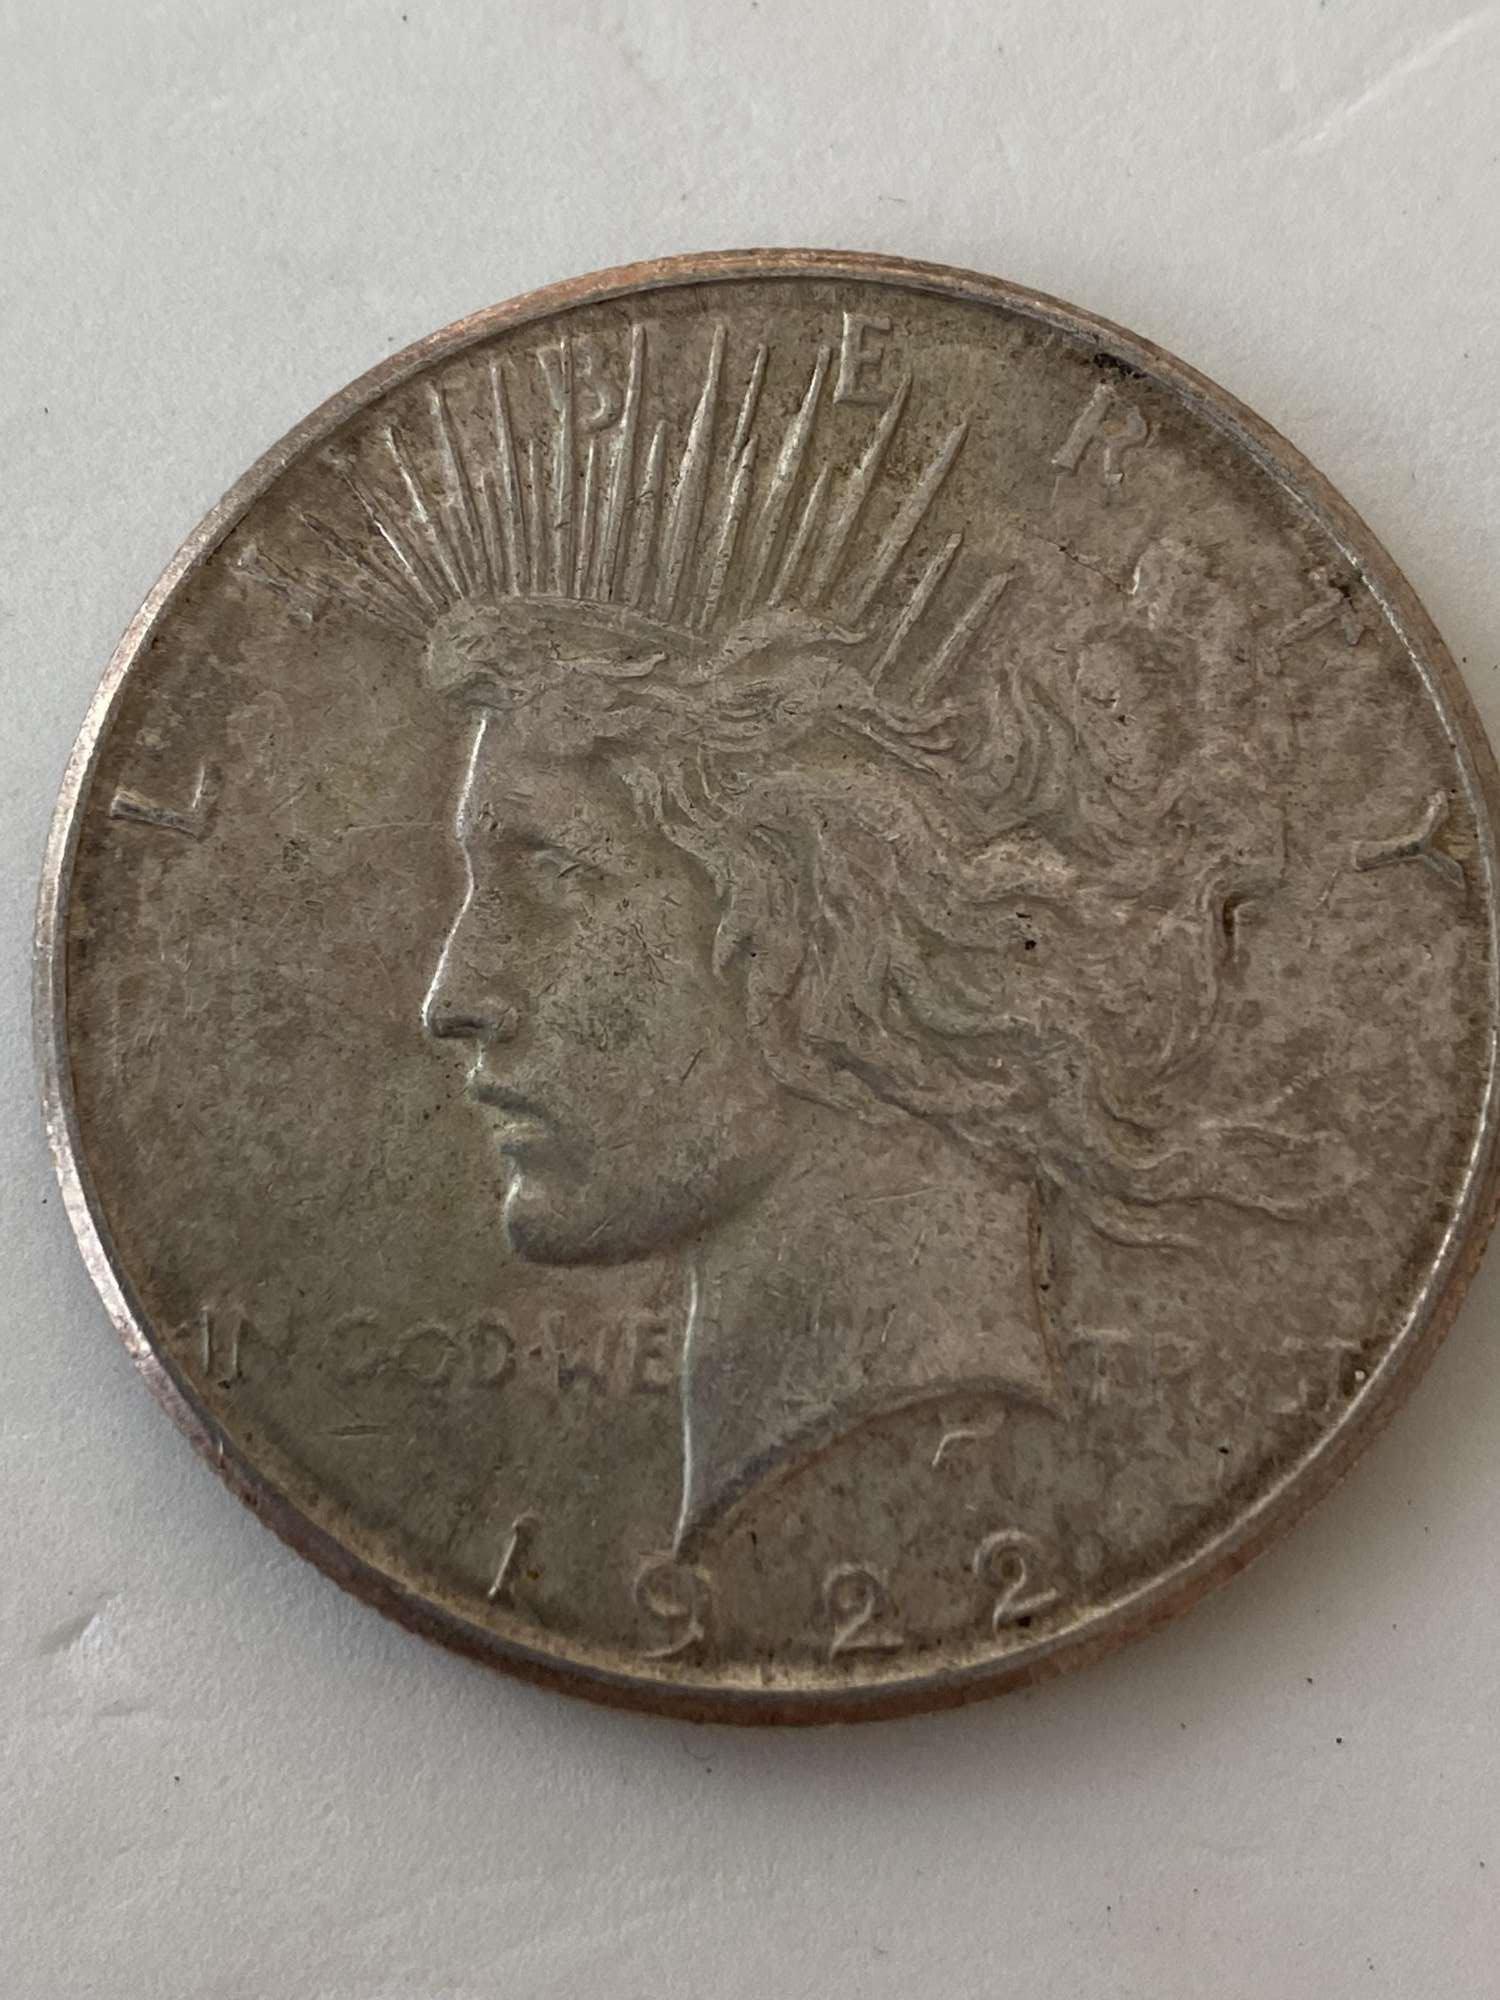 BETTER - TWO PEACE DOLLARS